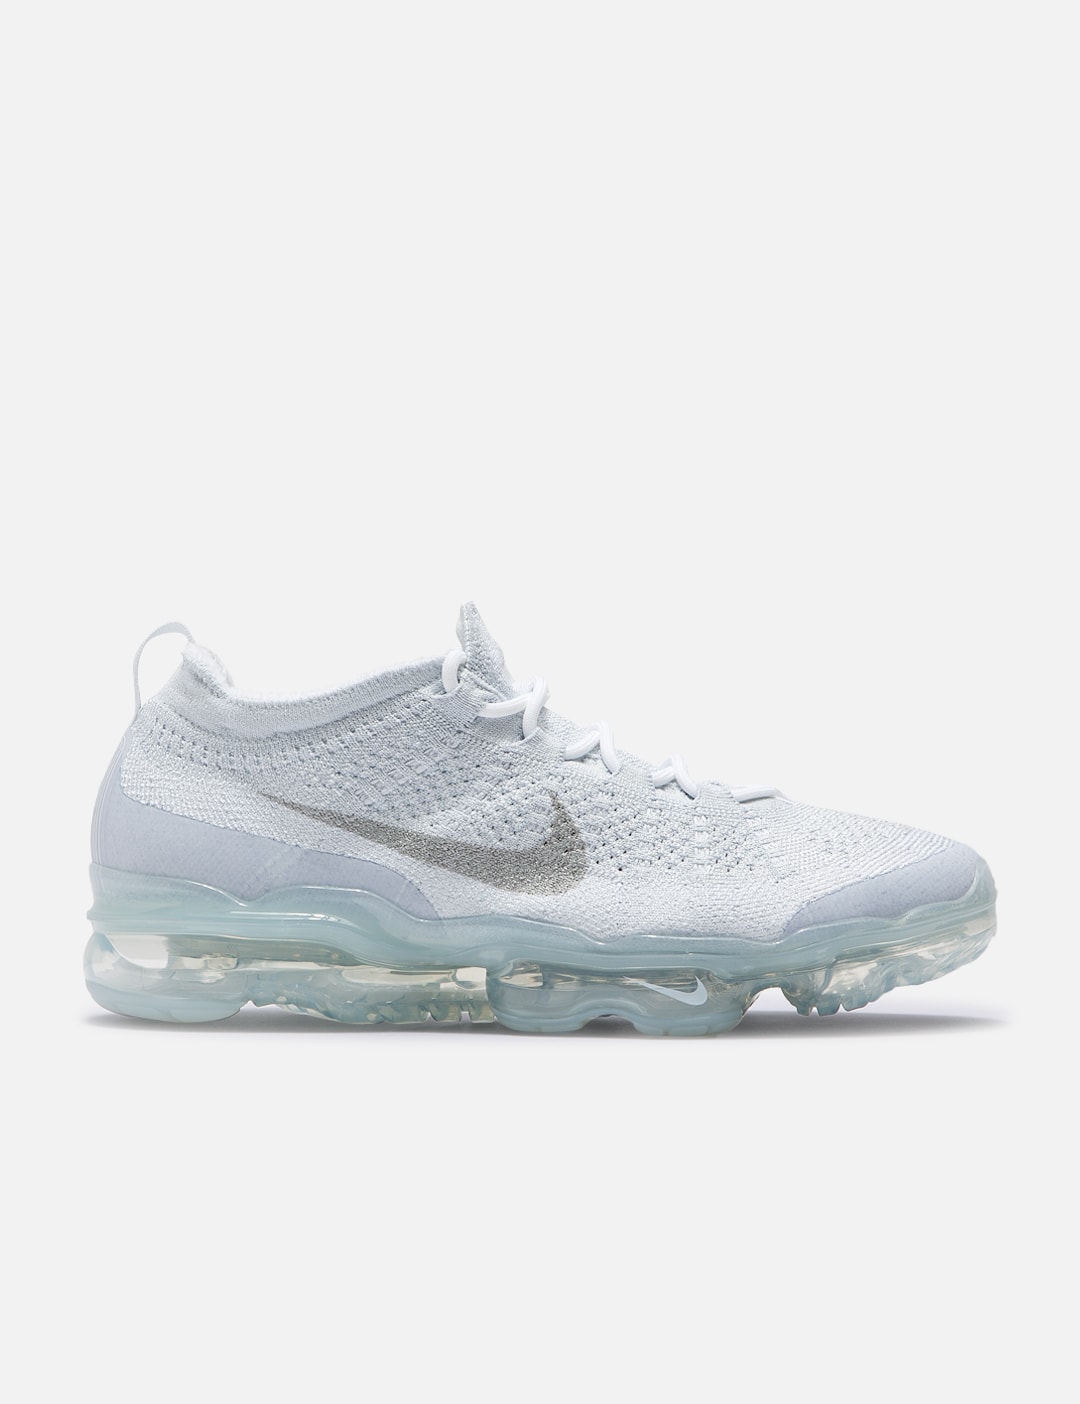 Nike - Nike Air VaporMax 'Pure Platinum' | HBX - Globally Curated Fashion and Lifestyle by Hypebeast